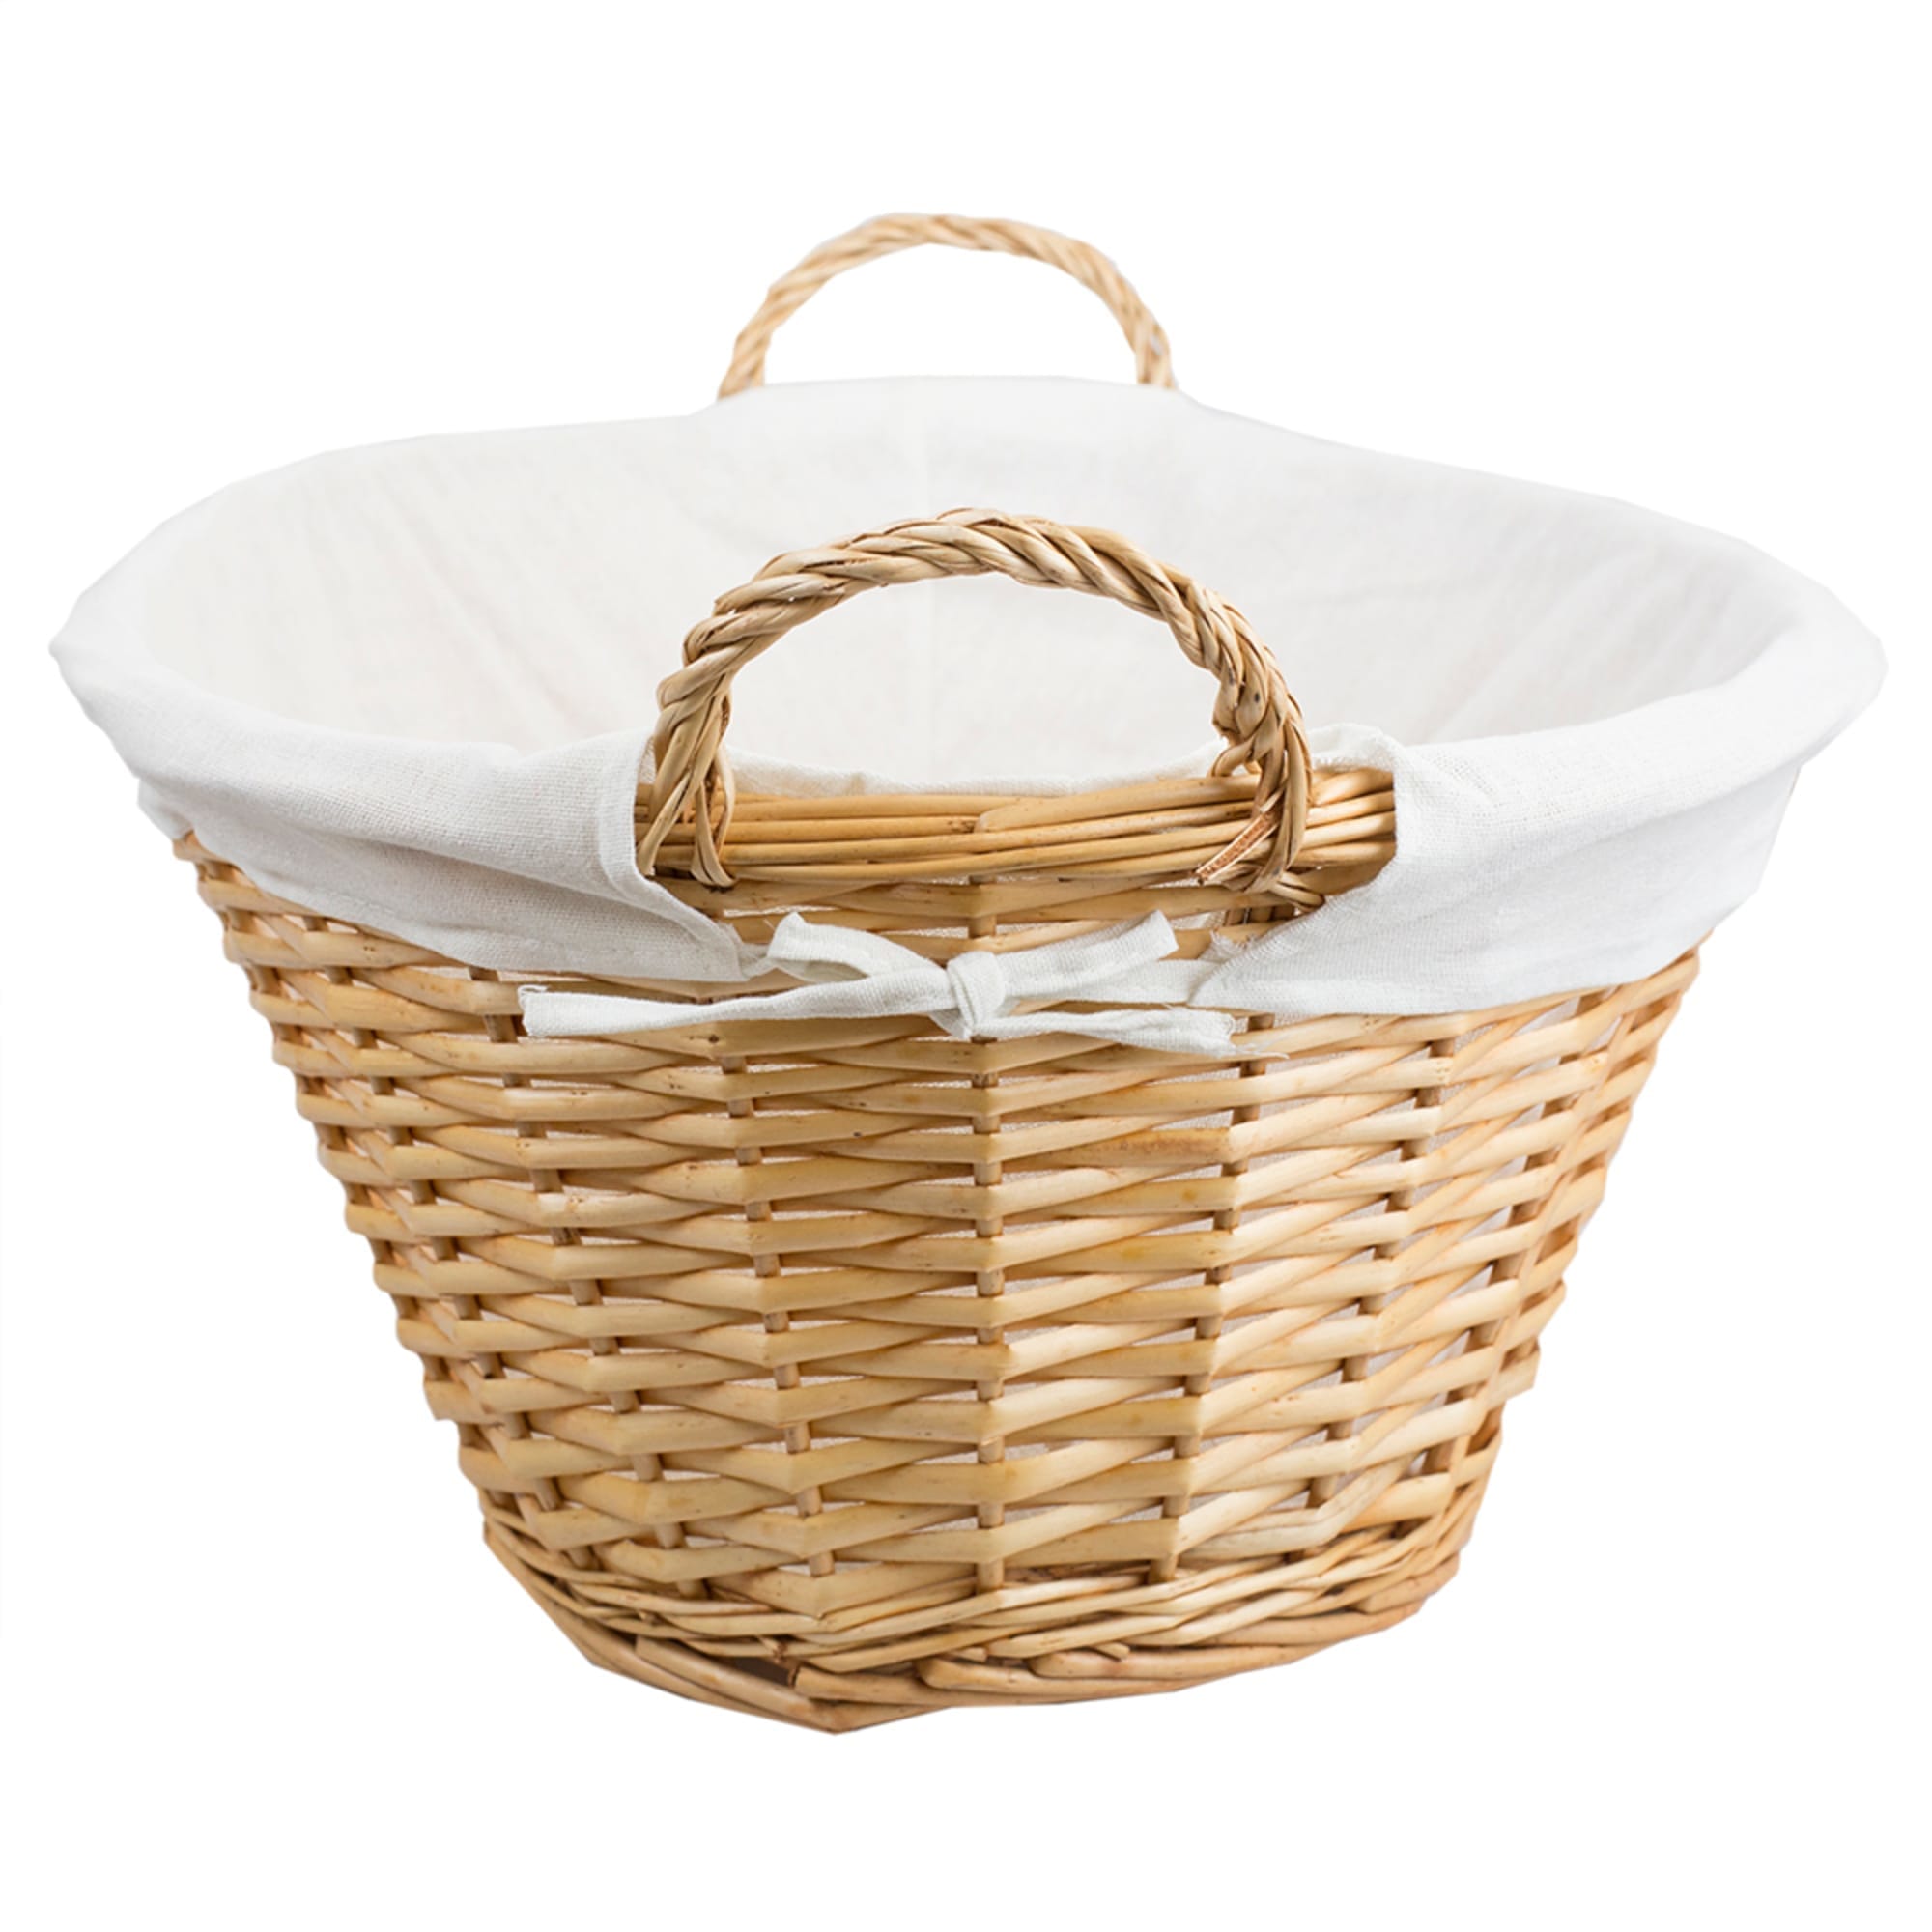 Home Basics Wicker Laundry Basket with Removeable Liner, Natural $10.00 EACH, CASE PACK OF 6